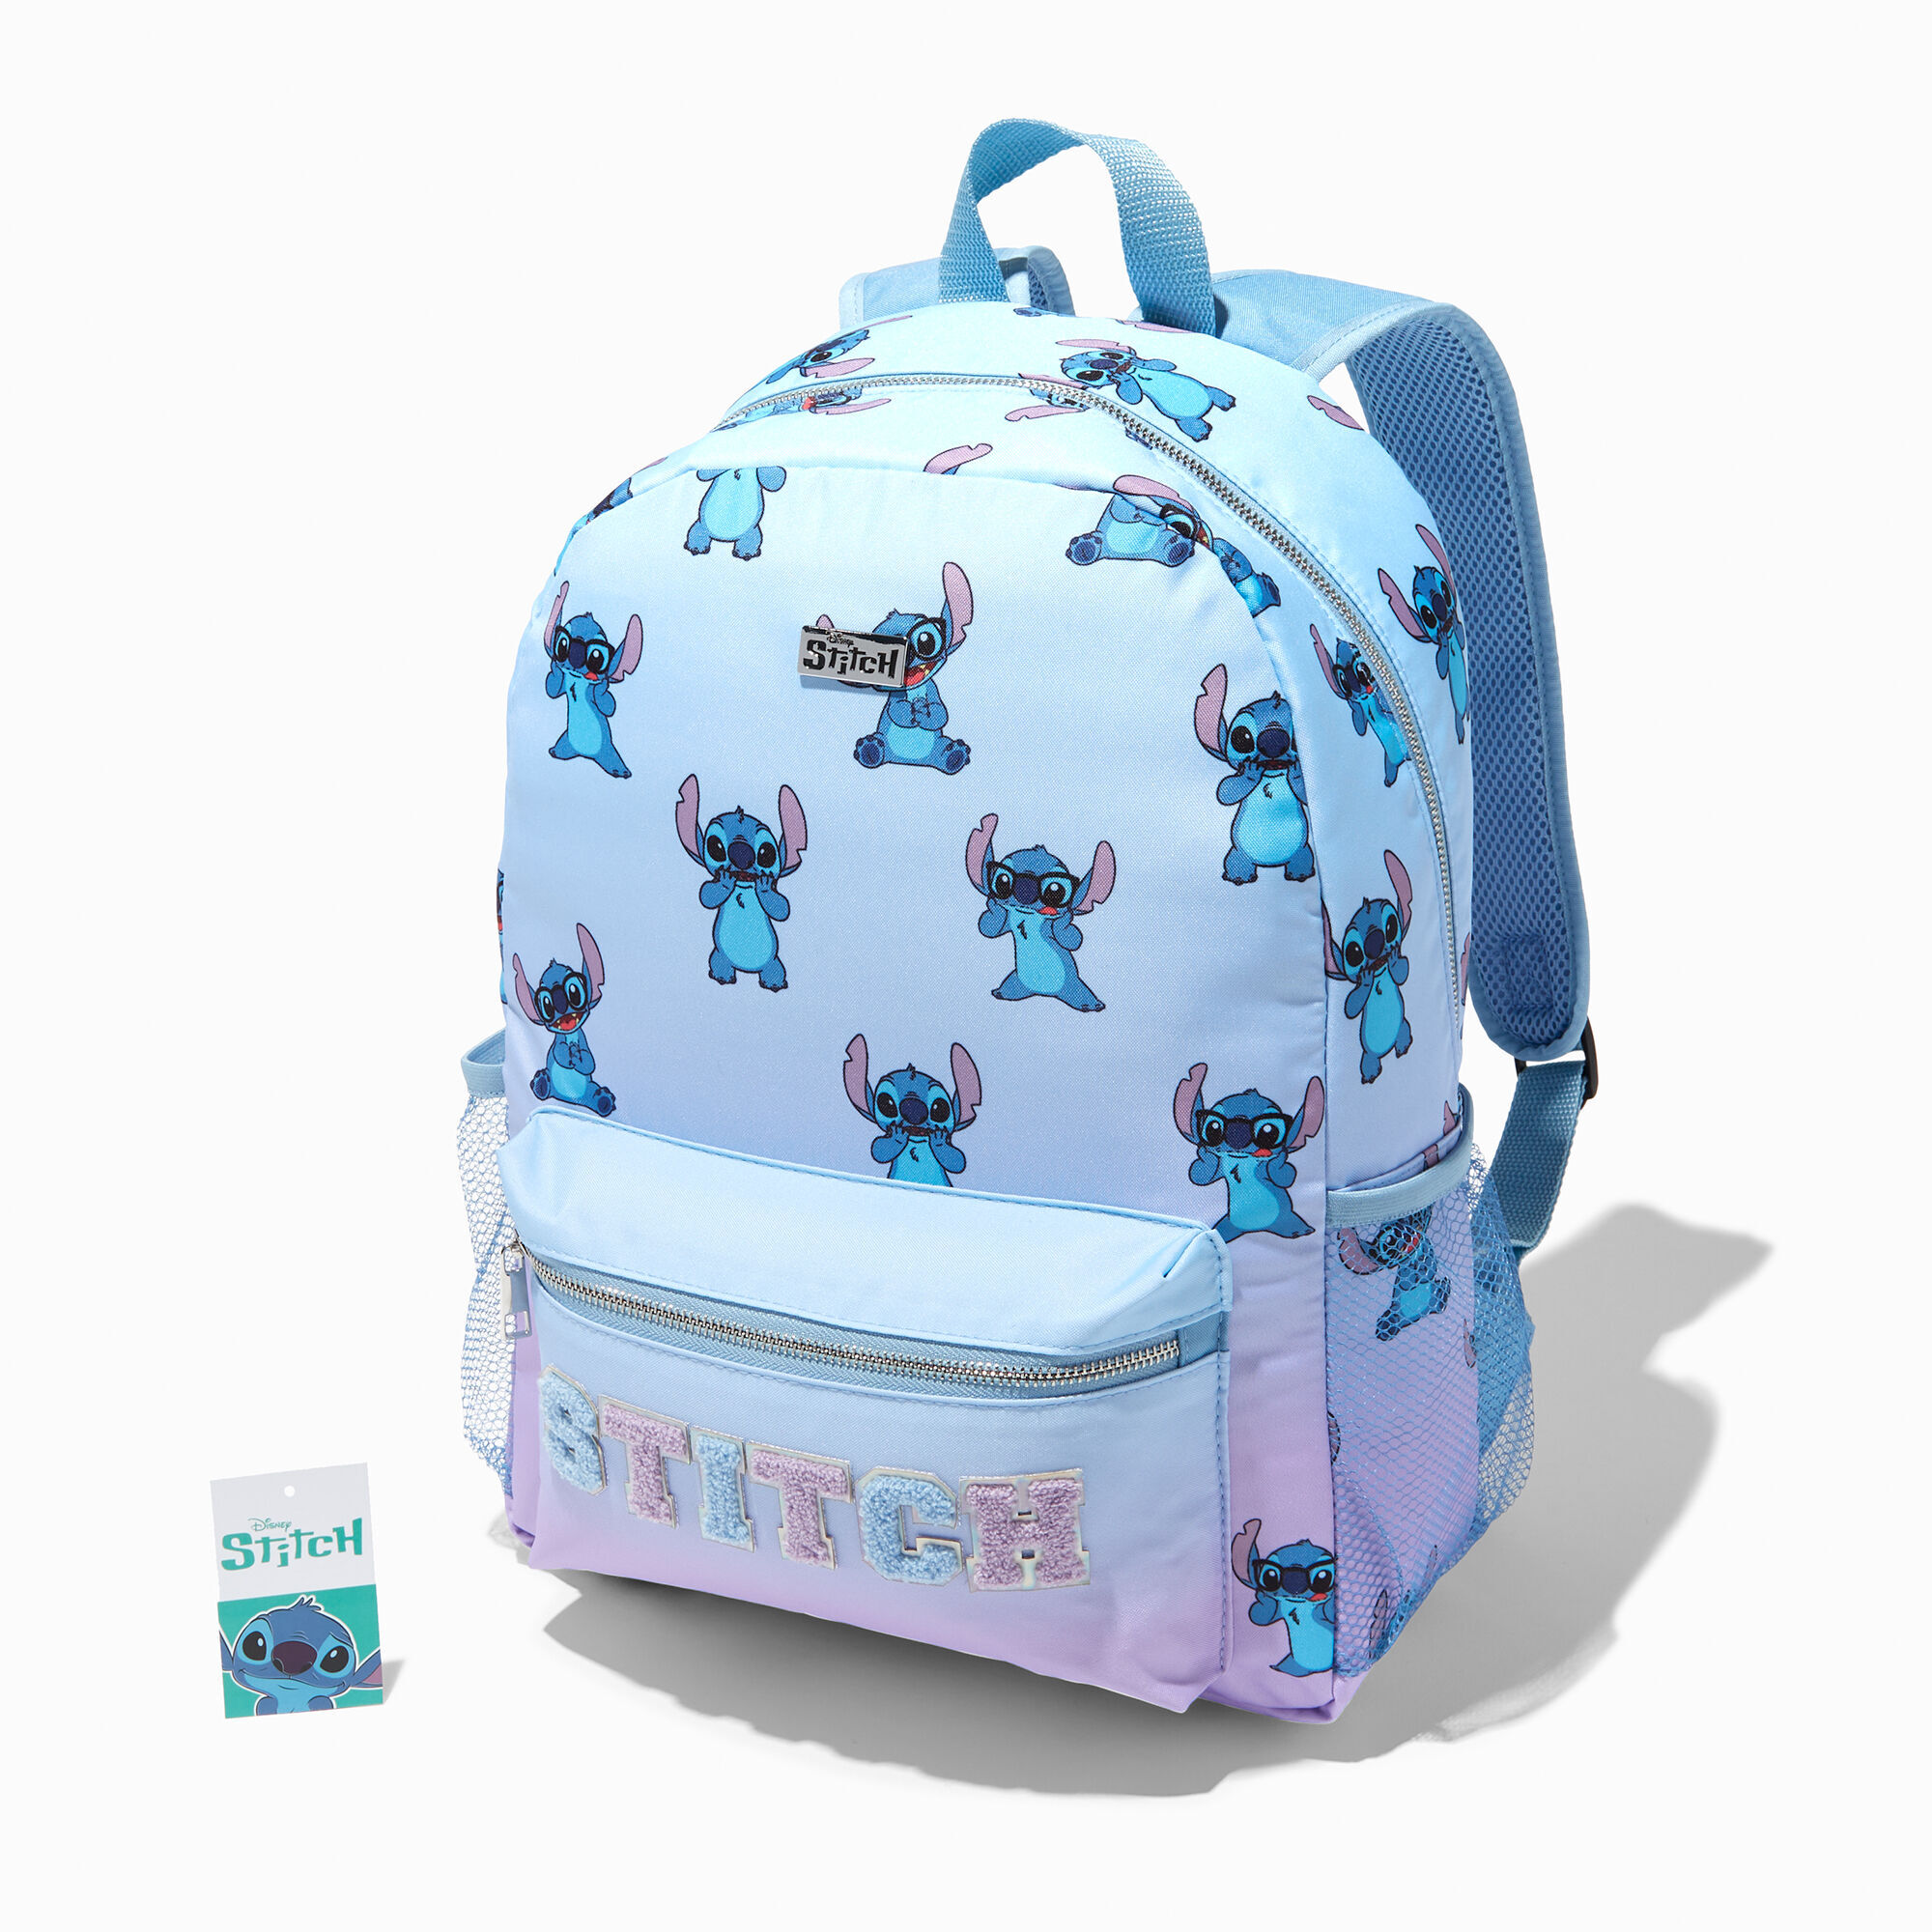 claire's disney stitch varsity backpack